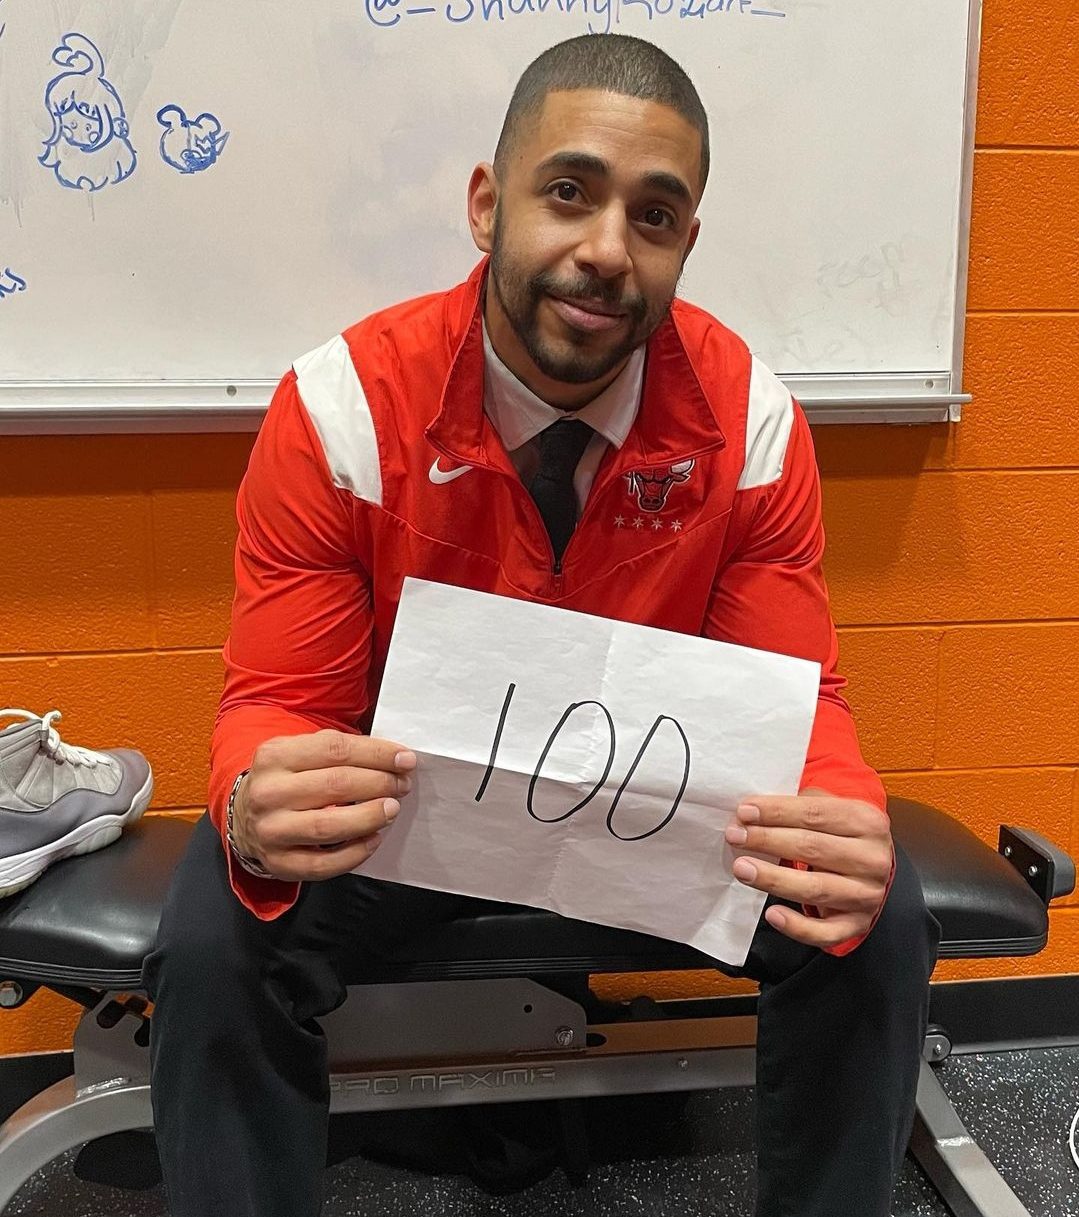 Jacob Goldstein poses for the photo. He is wearing a red & white, Chicago Bulls windbreaker jacket. He is holding a piece of paper with the number 100 written on it.